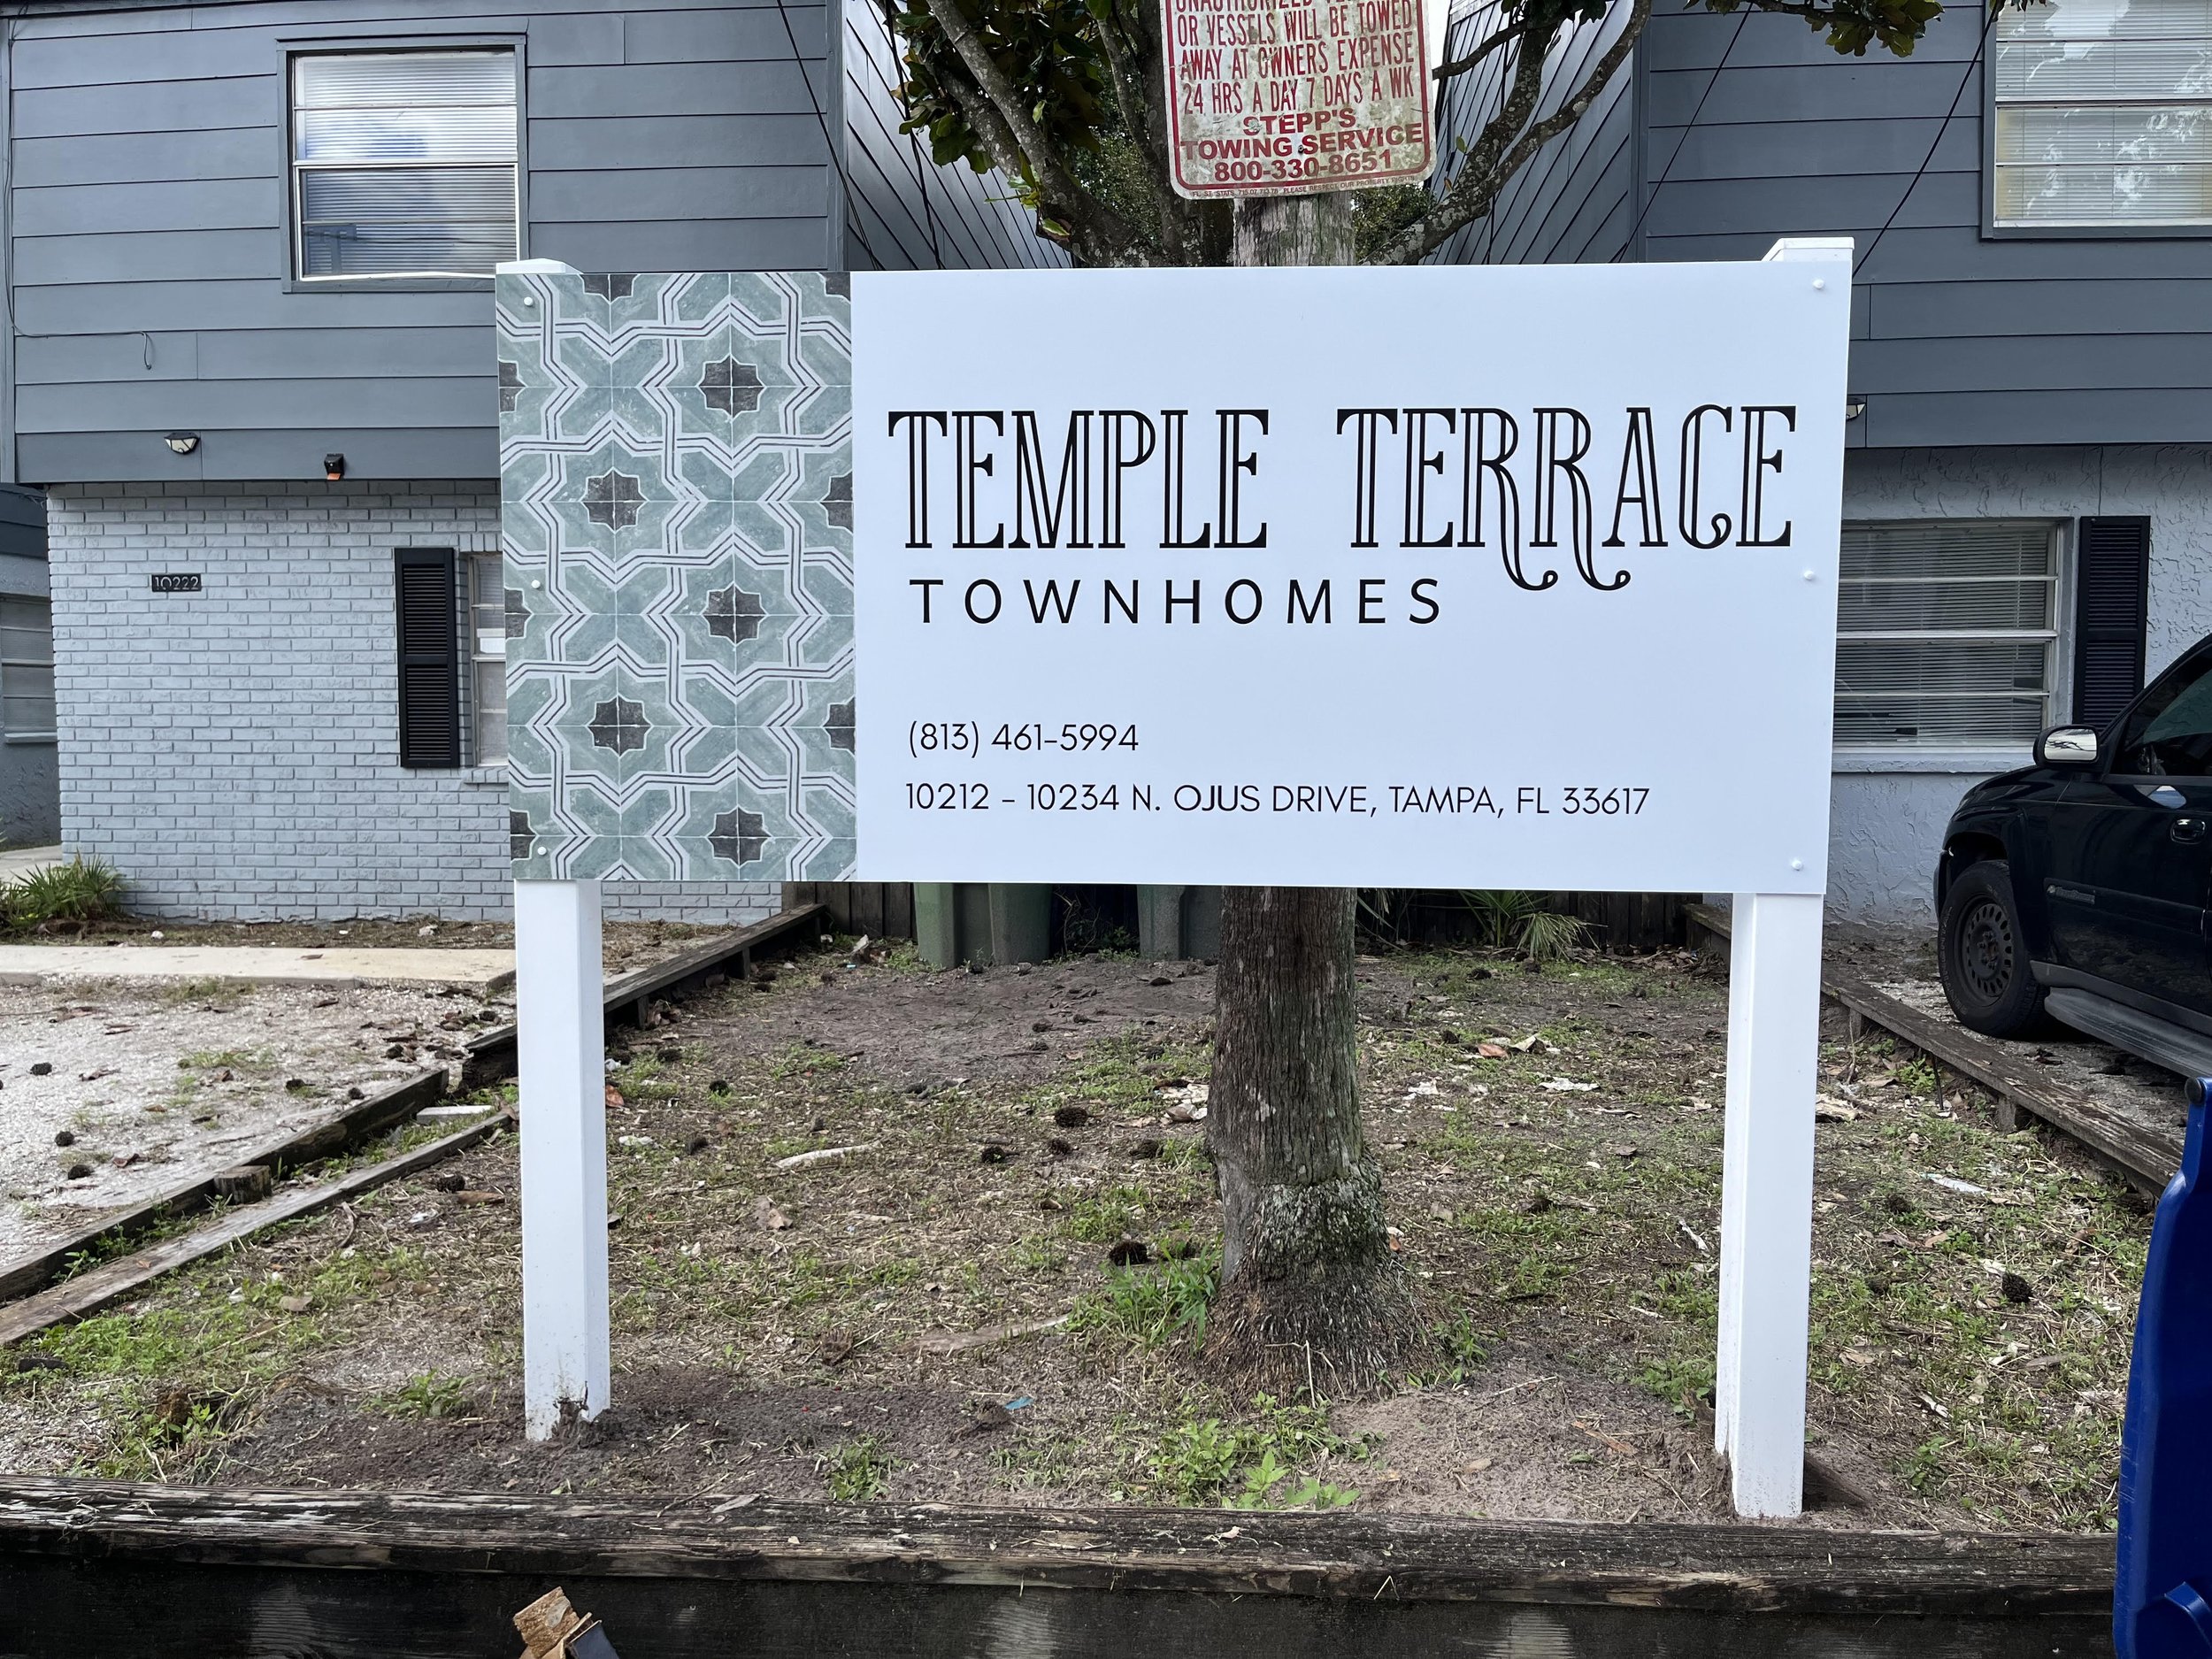 Temple Terrace Townhome New Sign.jpeg